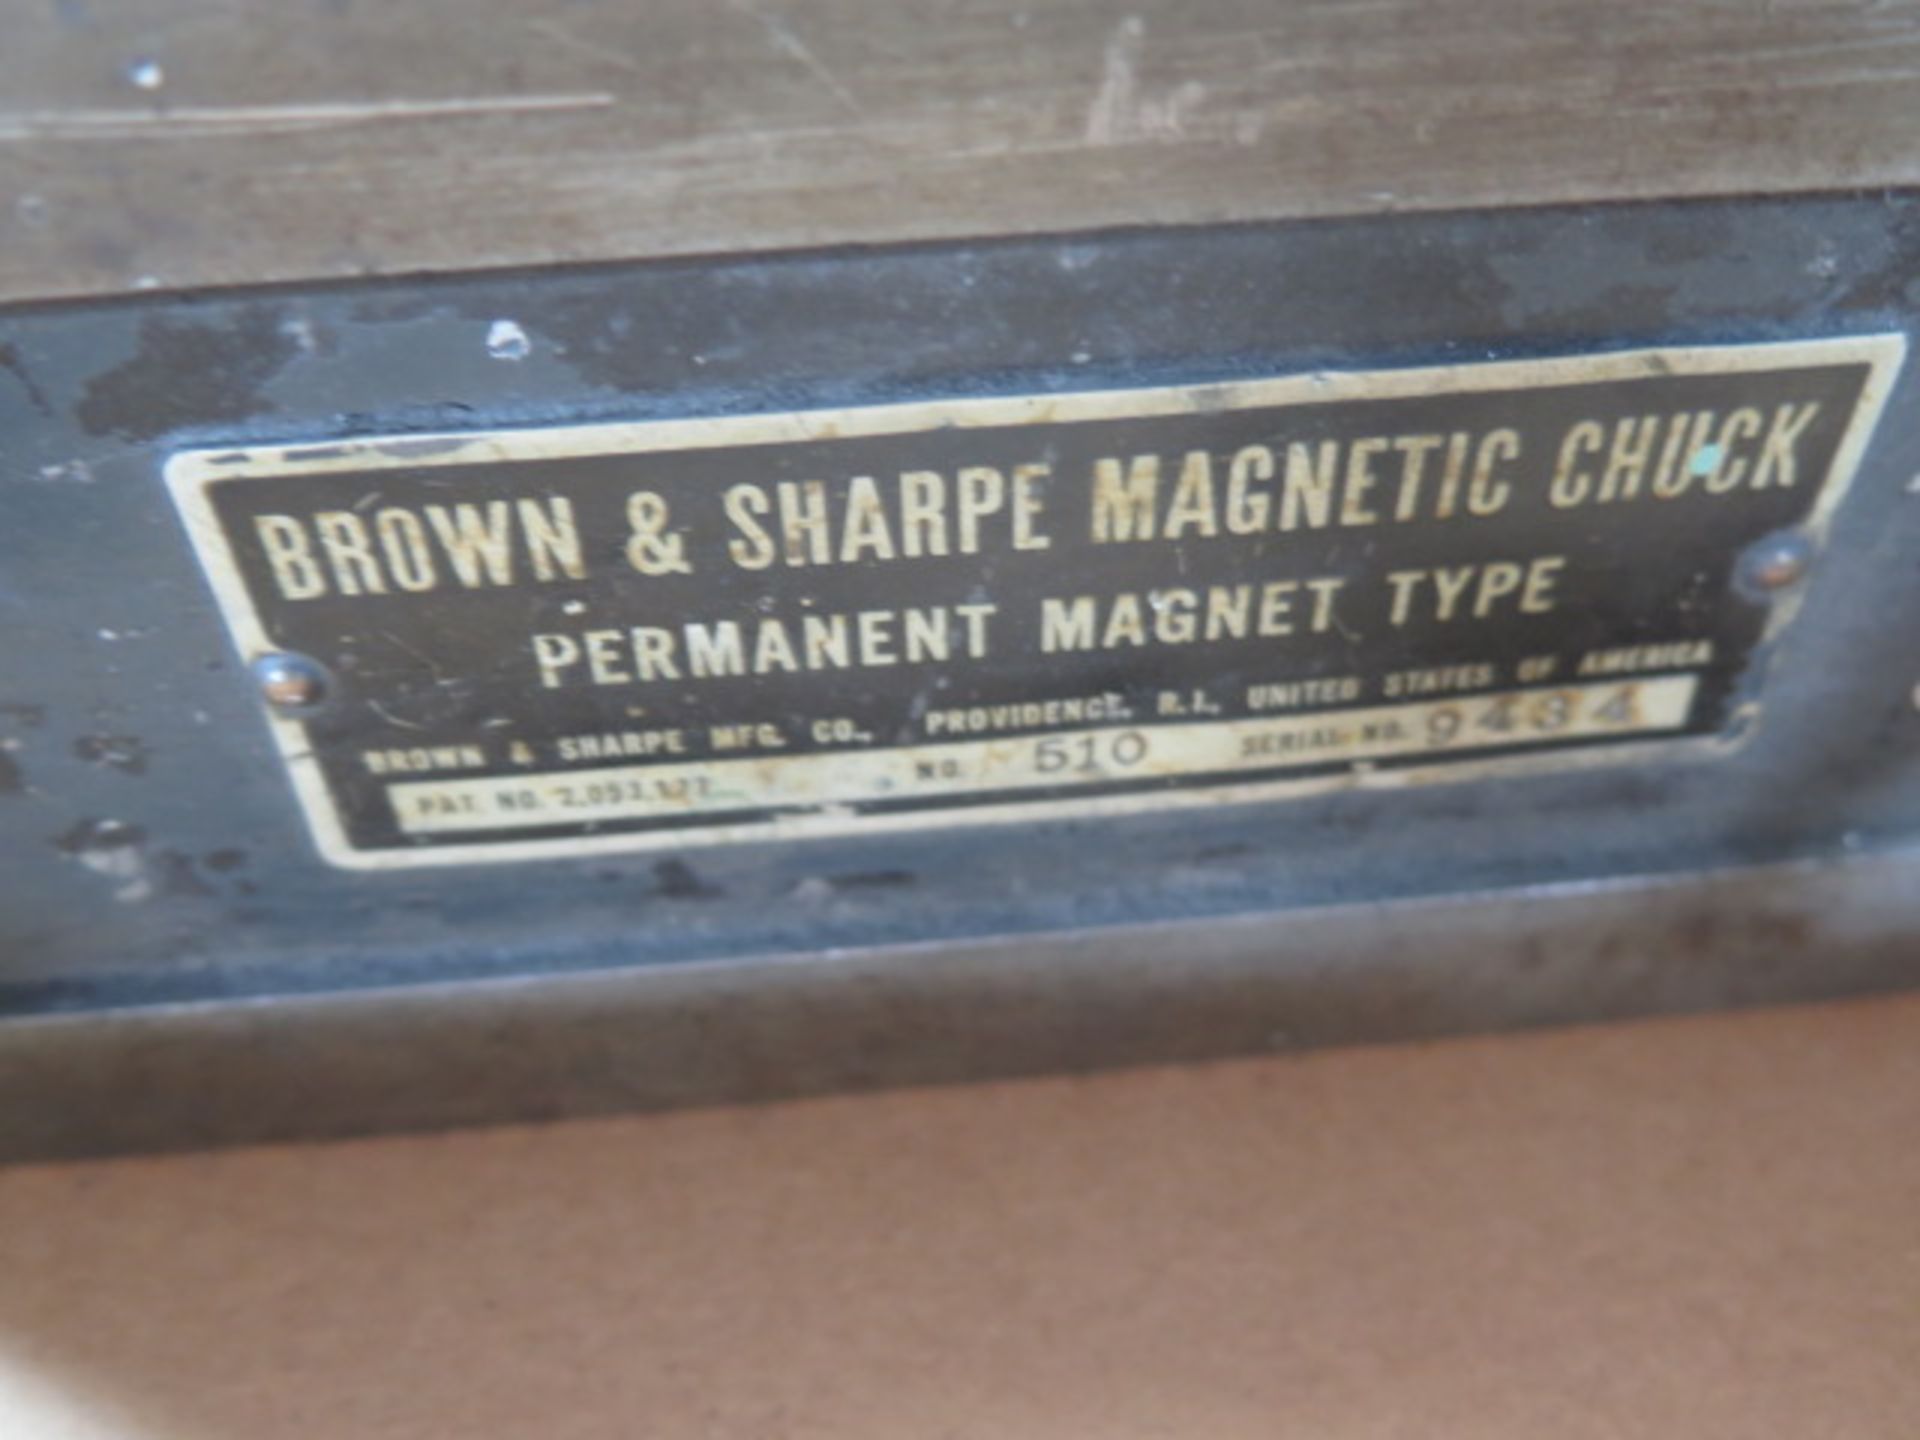 Brown & Sharpe 5 1/2" x 10 1/2" Magnetic Chuck - Image 3 of 3